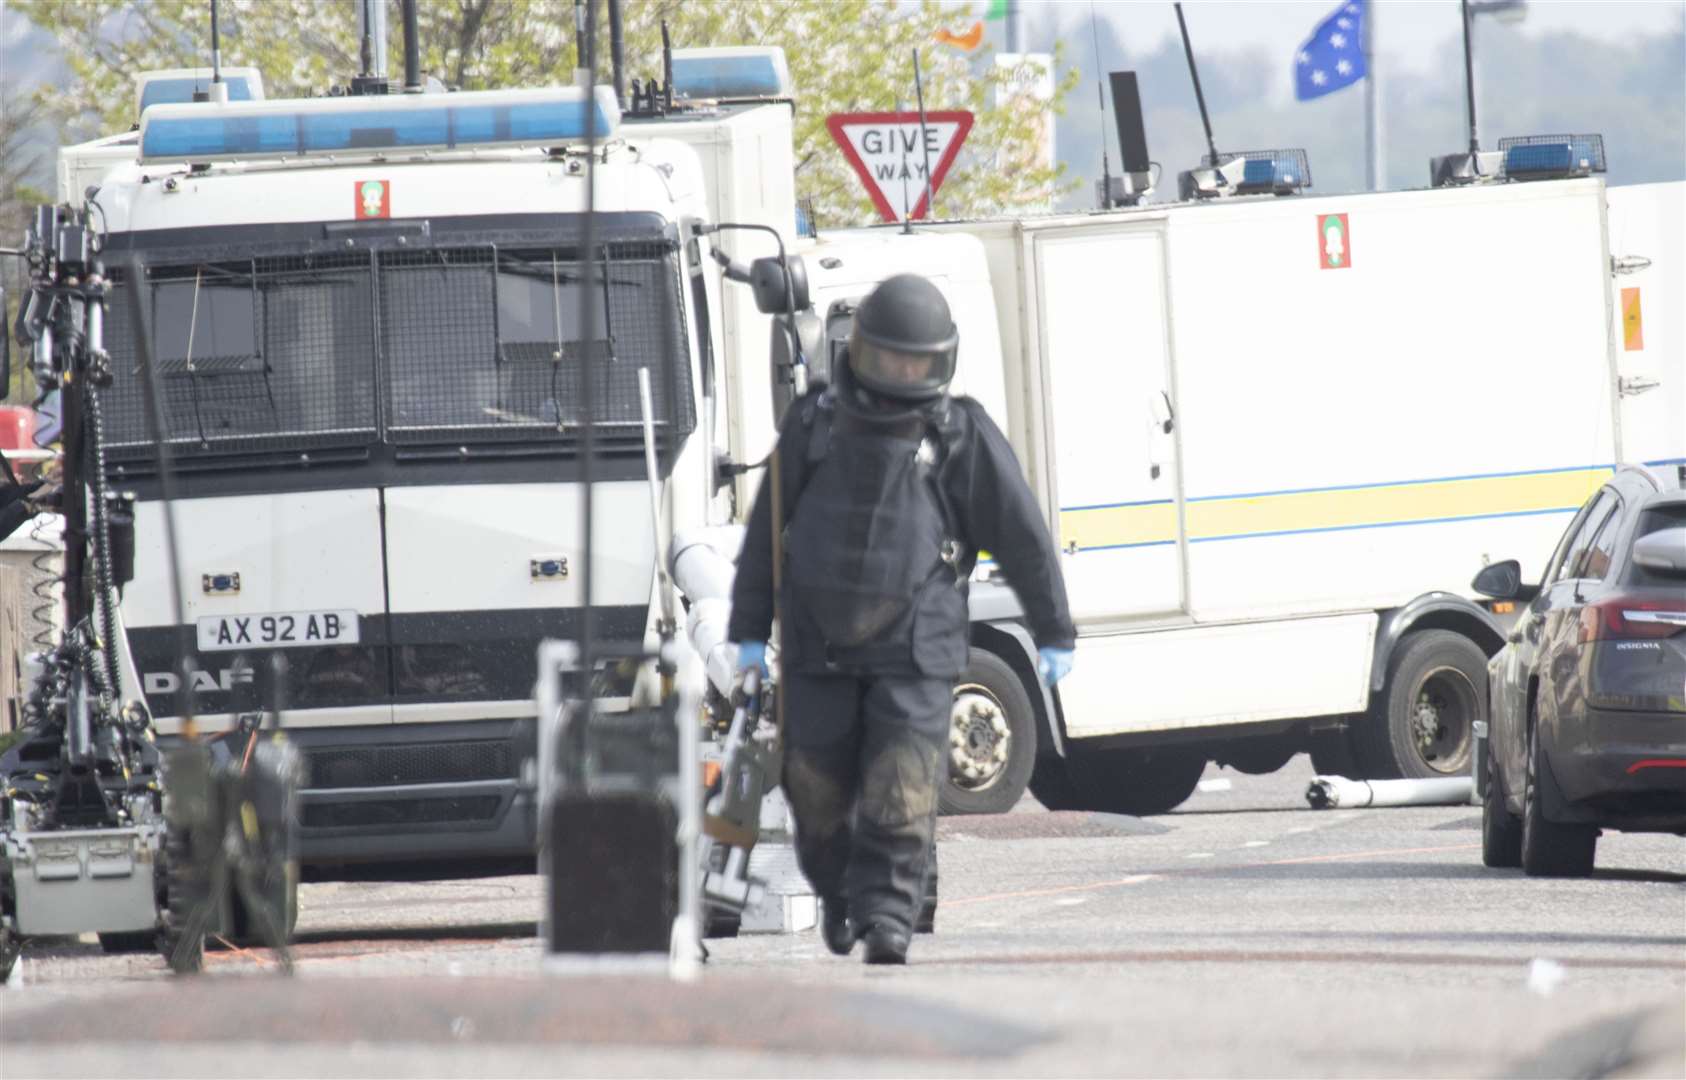 Ammunition technical officers (ATOs) attend a security alert at Iniscarn Road in Londonderry where a suspect device was found at the home of independent councillor Gary Donnelly. (Joe Boland/PA)